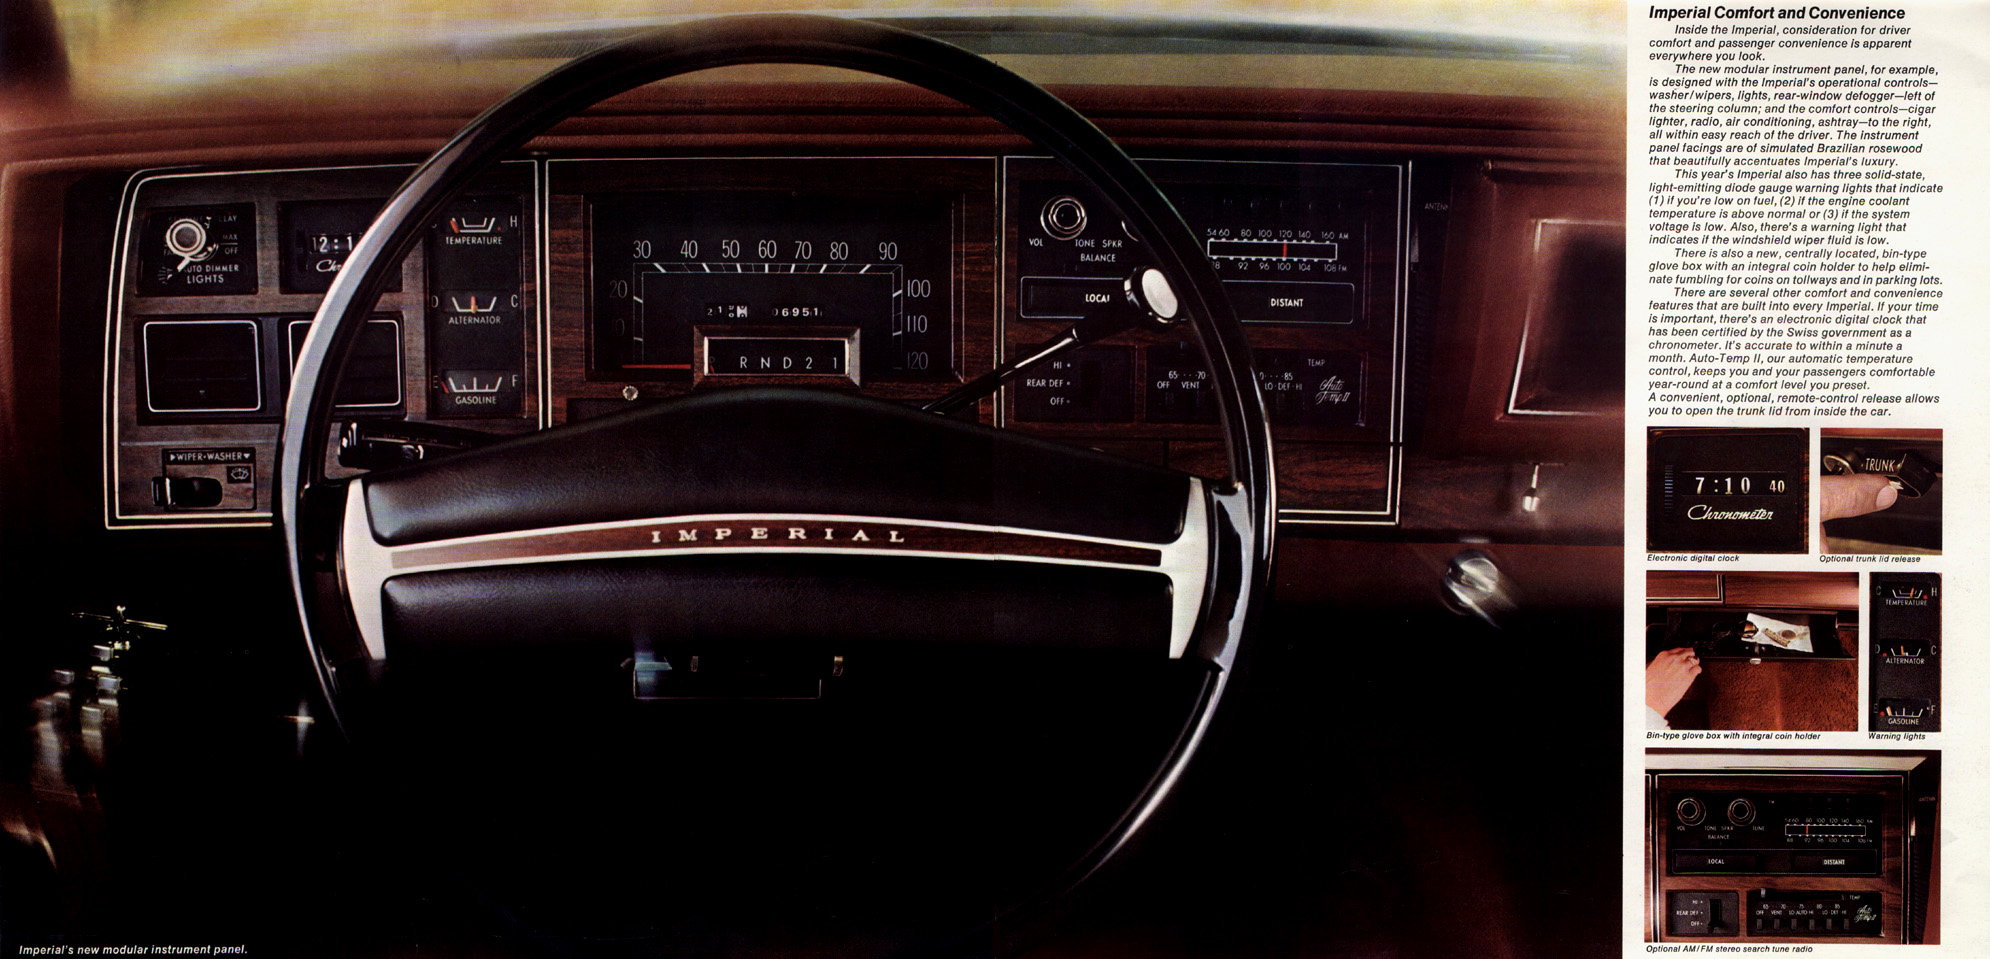 1974 Chrysler Imperial Brochure Page 6